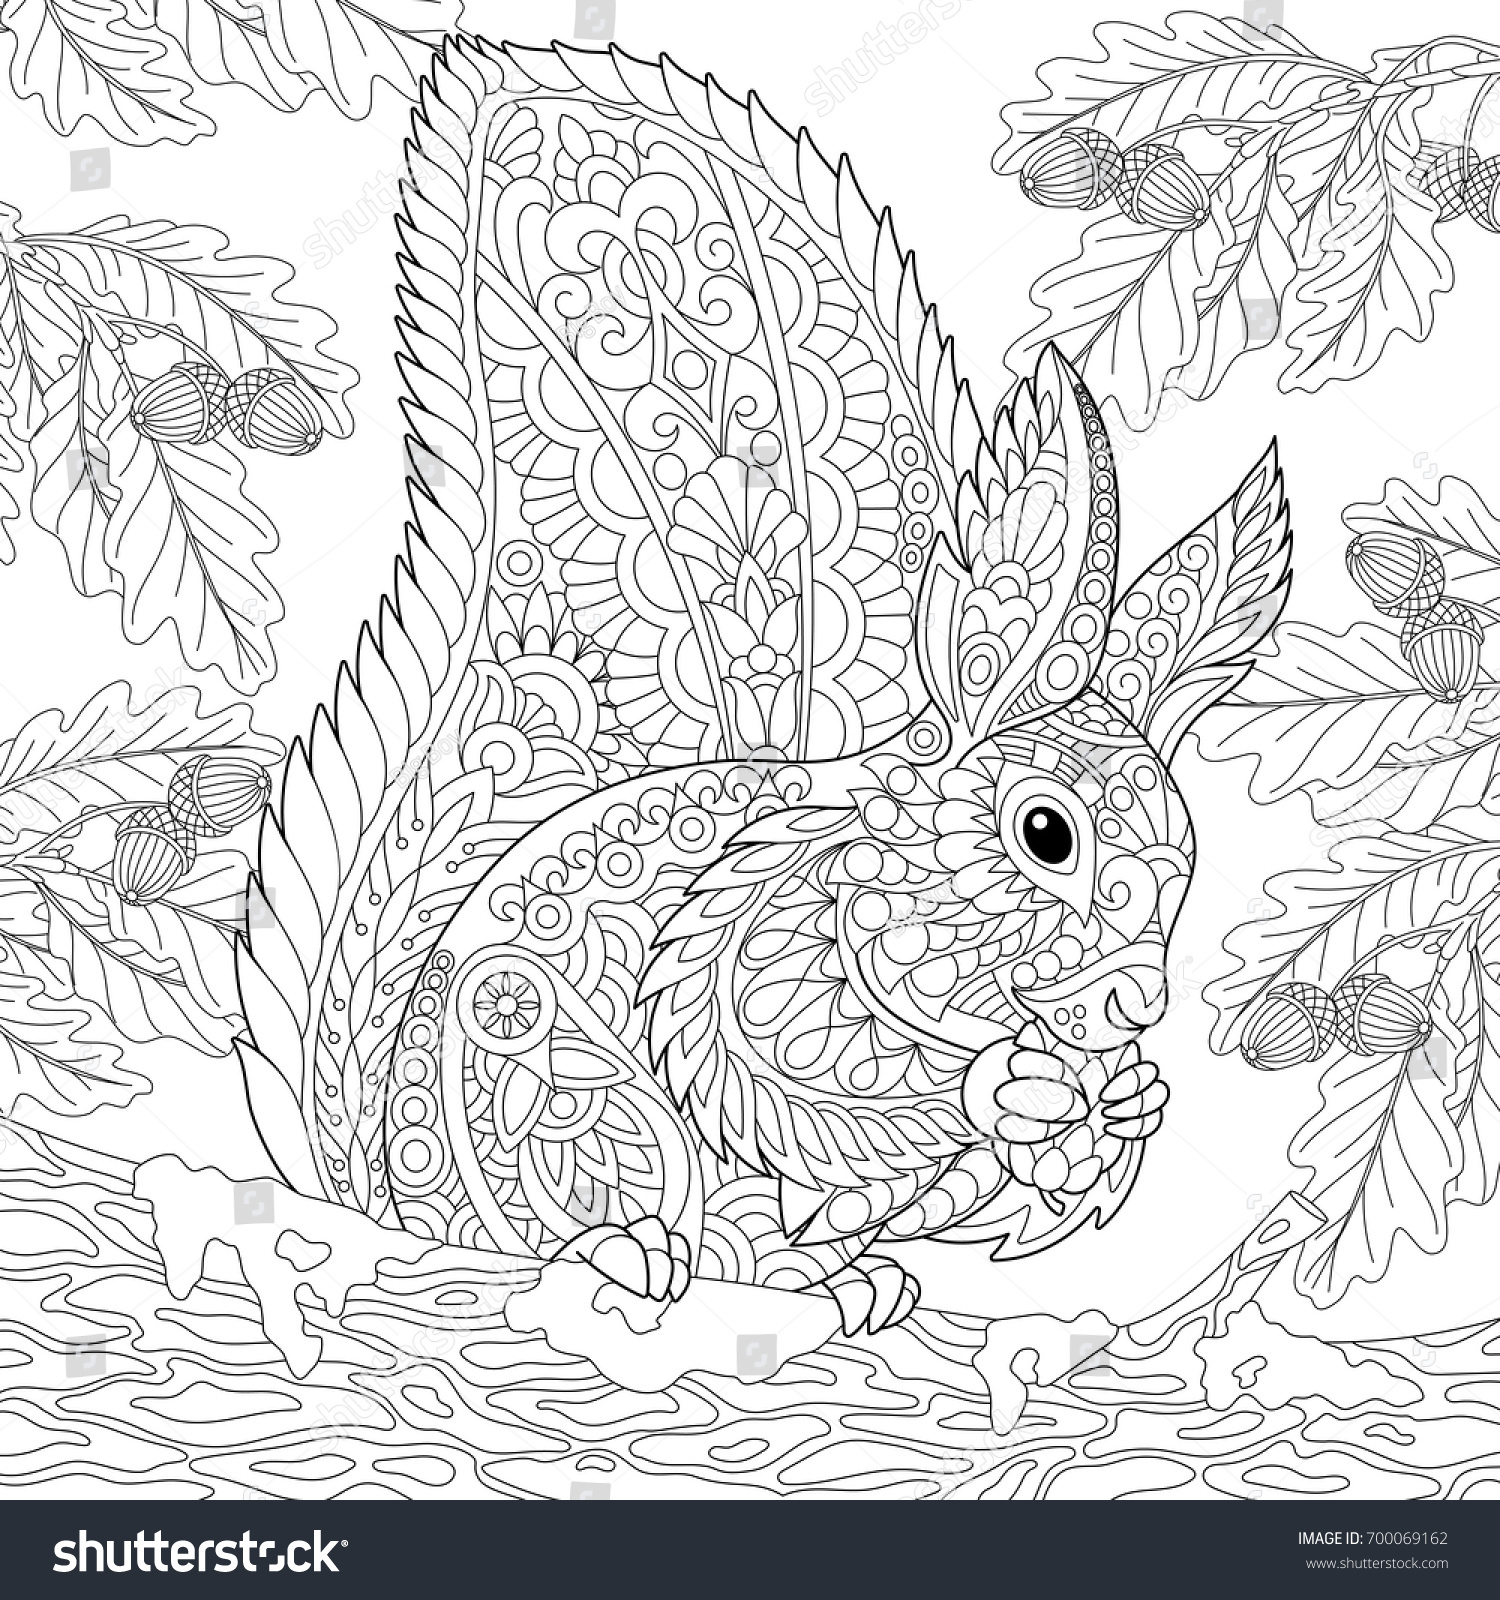 VYK Download Coloring Page Of A Squirrel Sitting On An Oak Tree Branch And  Ebook